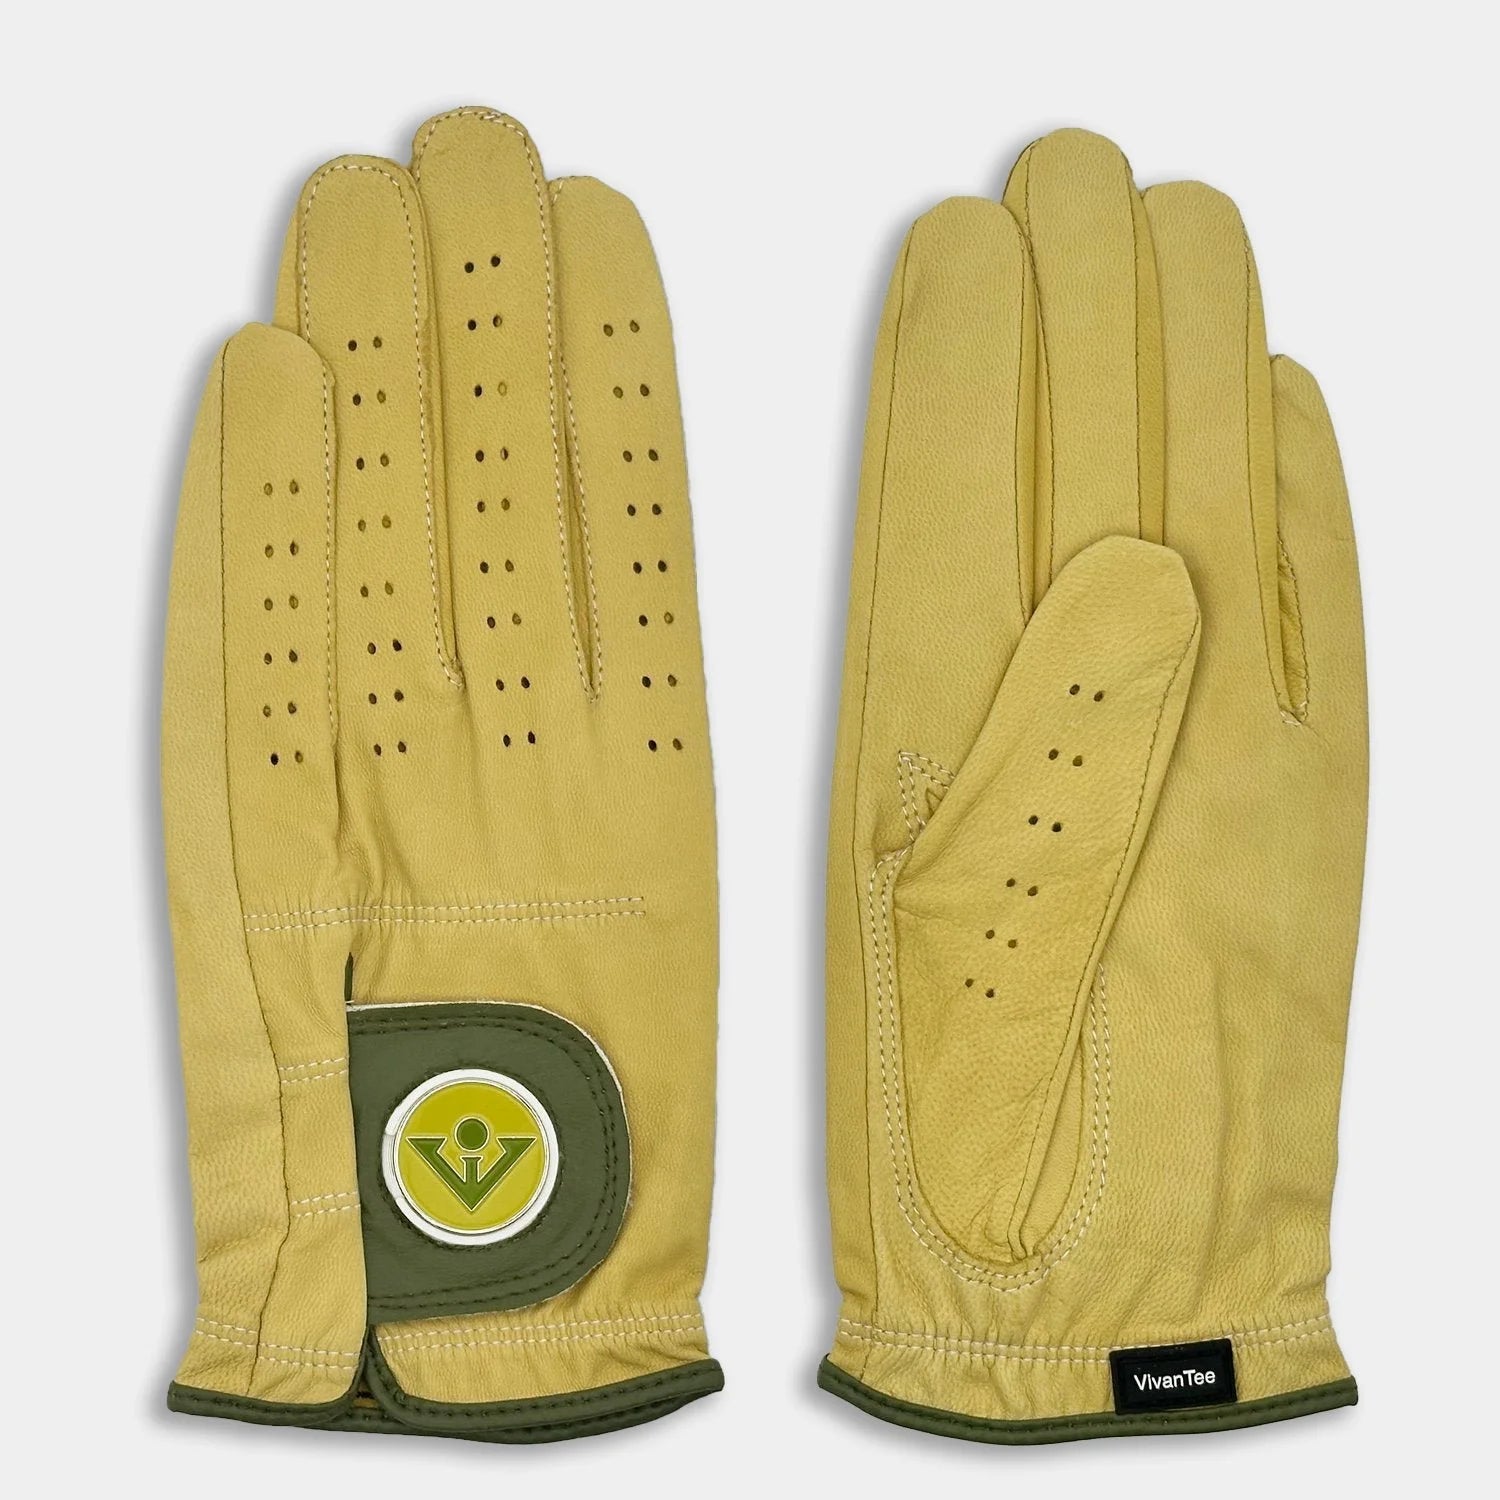 Mustard yellow and green golf glove for men laying wide by side showing top and bottom.